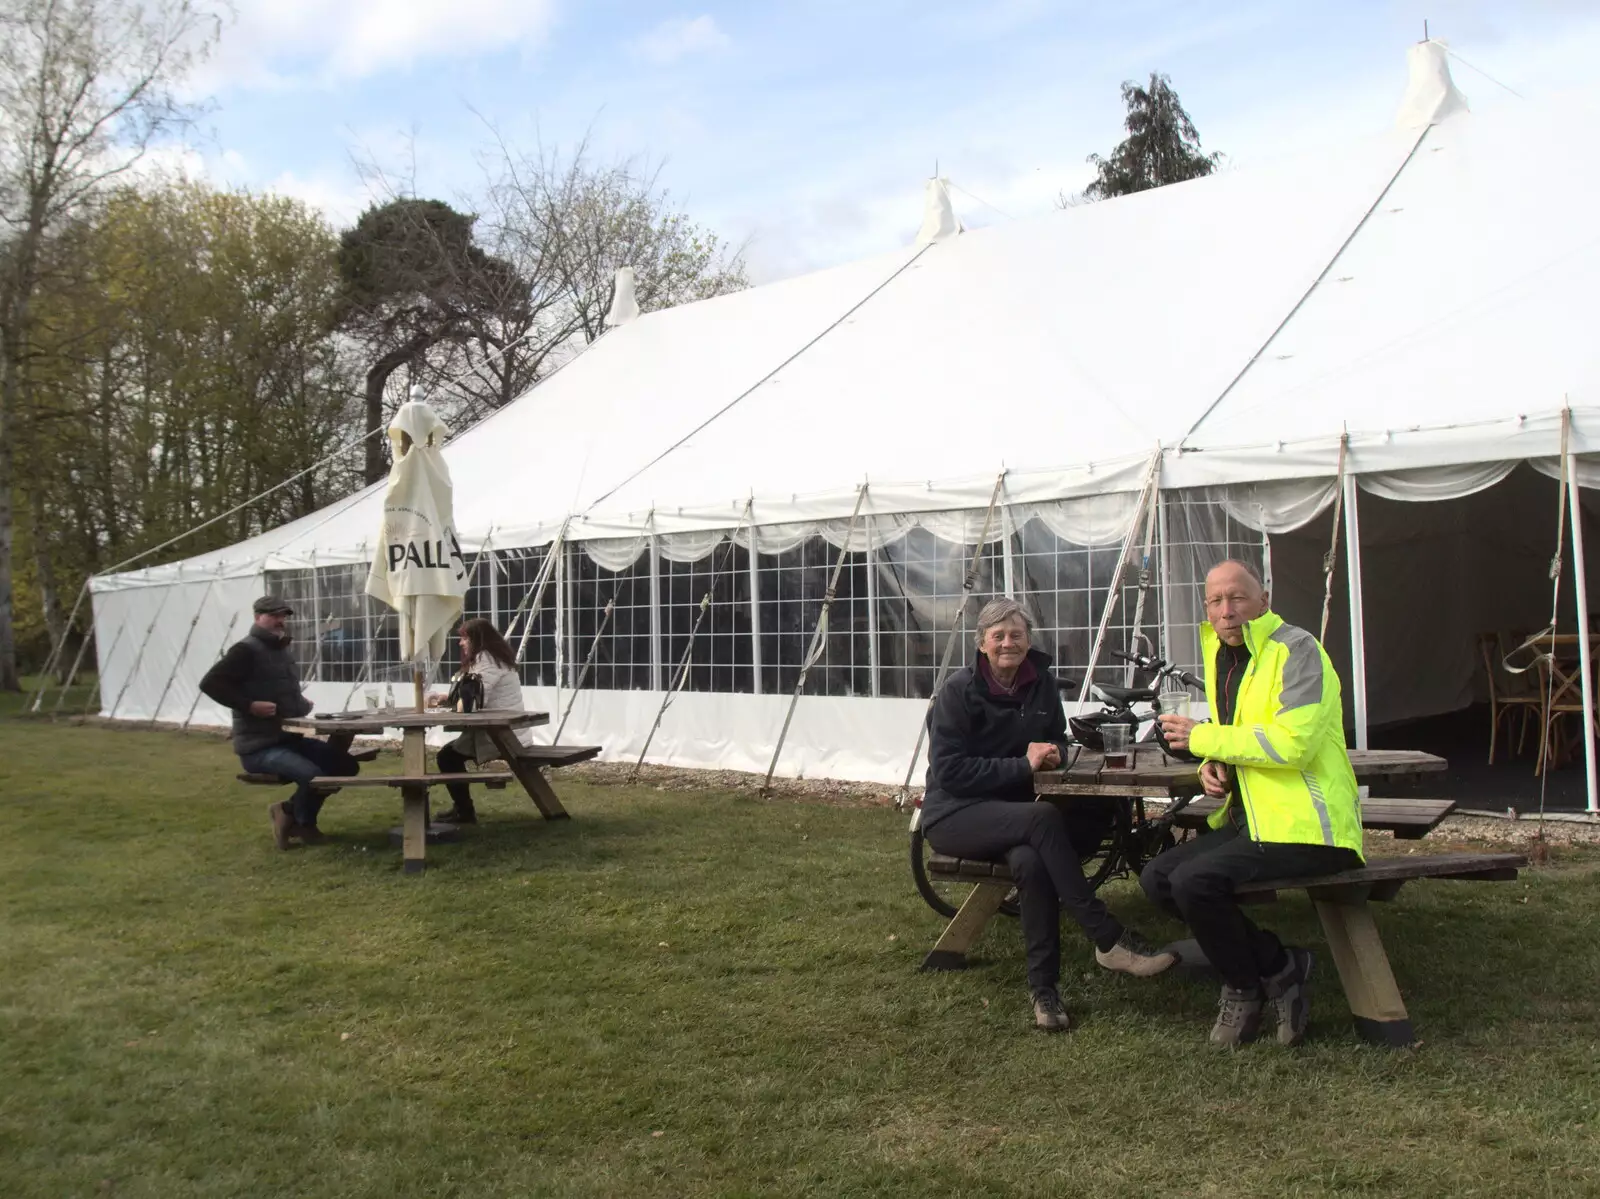 Pippa and Apple are on the adjacent table, from BSCC Beer Garden Hypothermia, Hoxne and Brome, Suffolk - 22nd April 2021